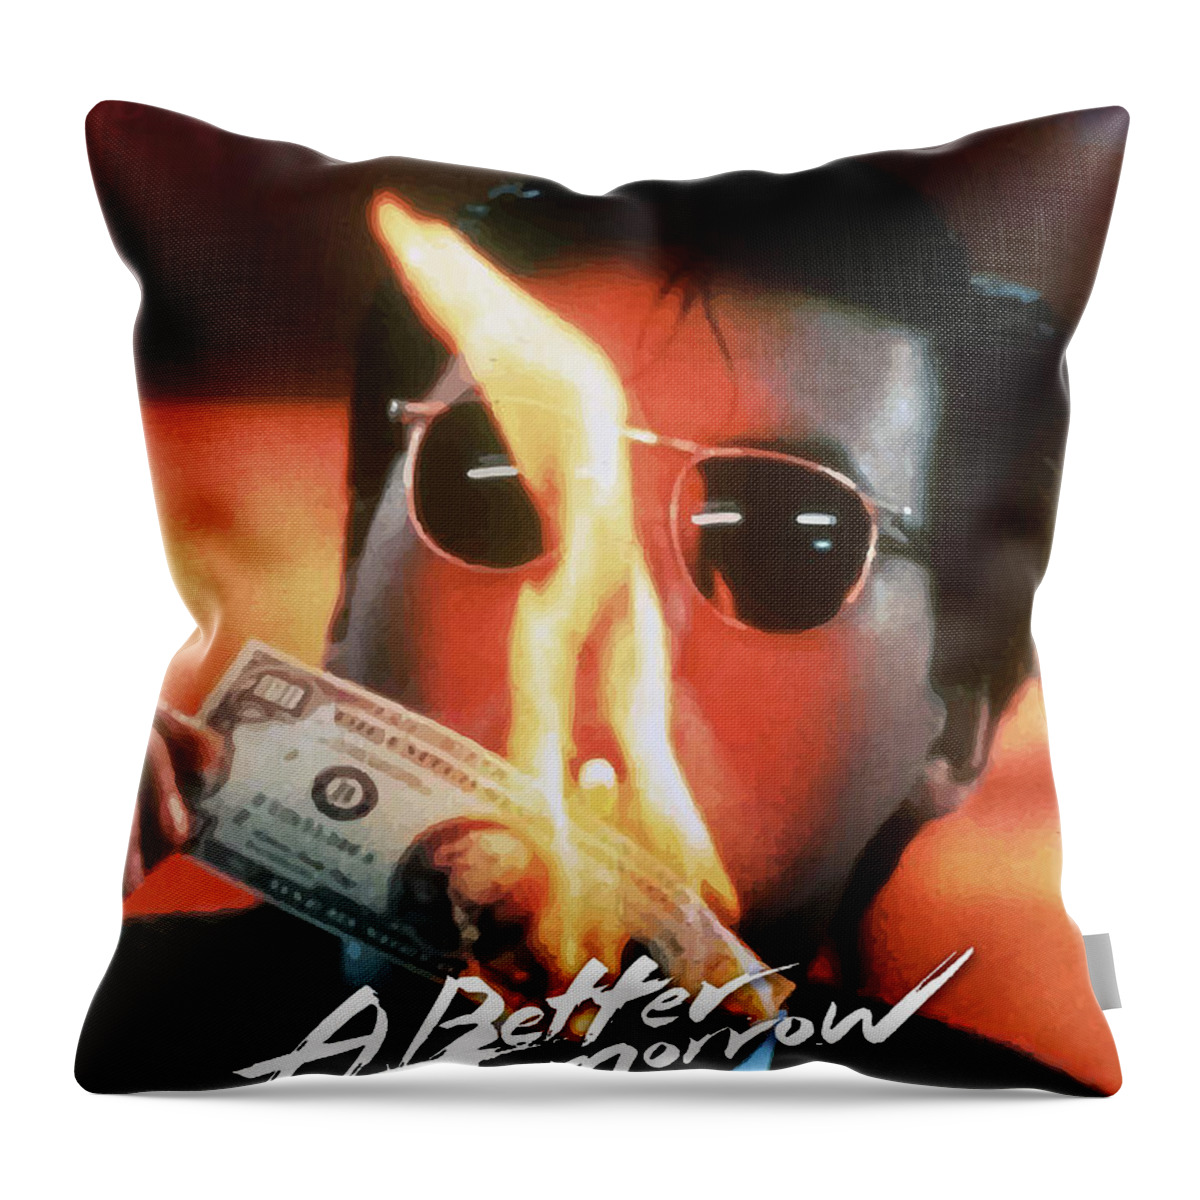 Movie Poster Throw Pillow featuring the digital art A Better Tomorrow by Bo Kev